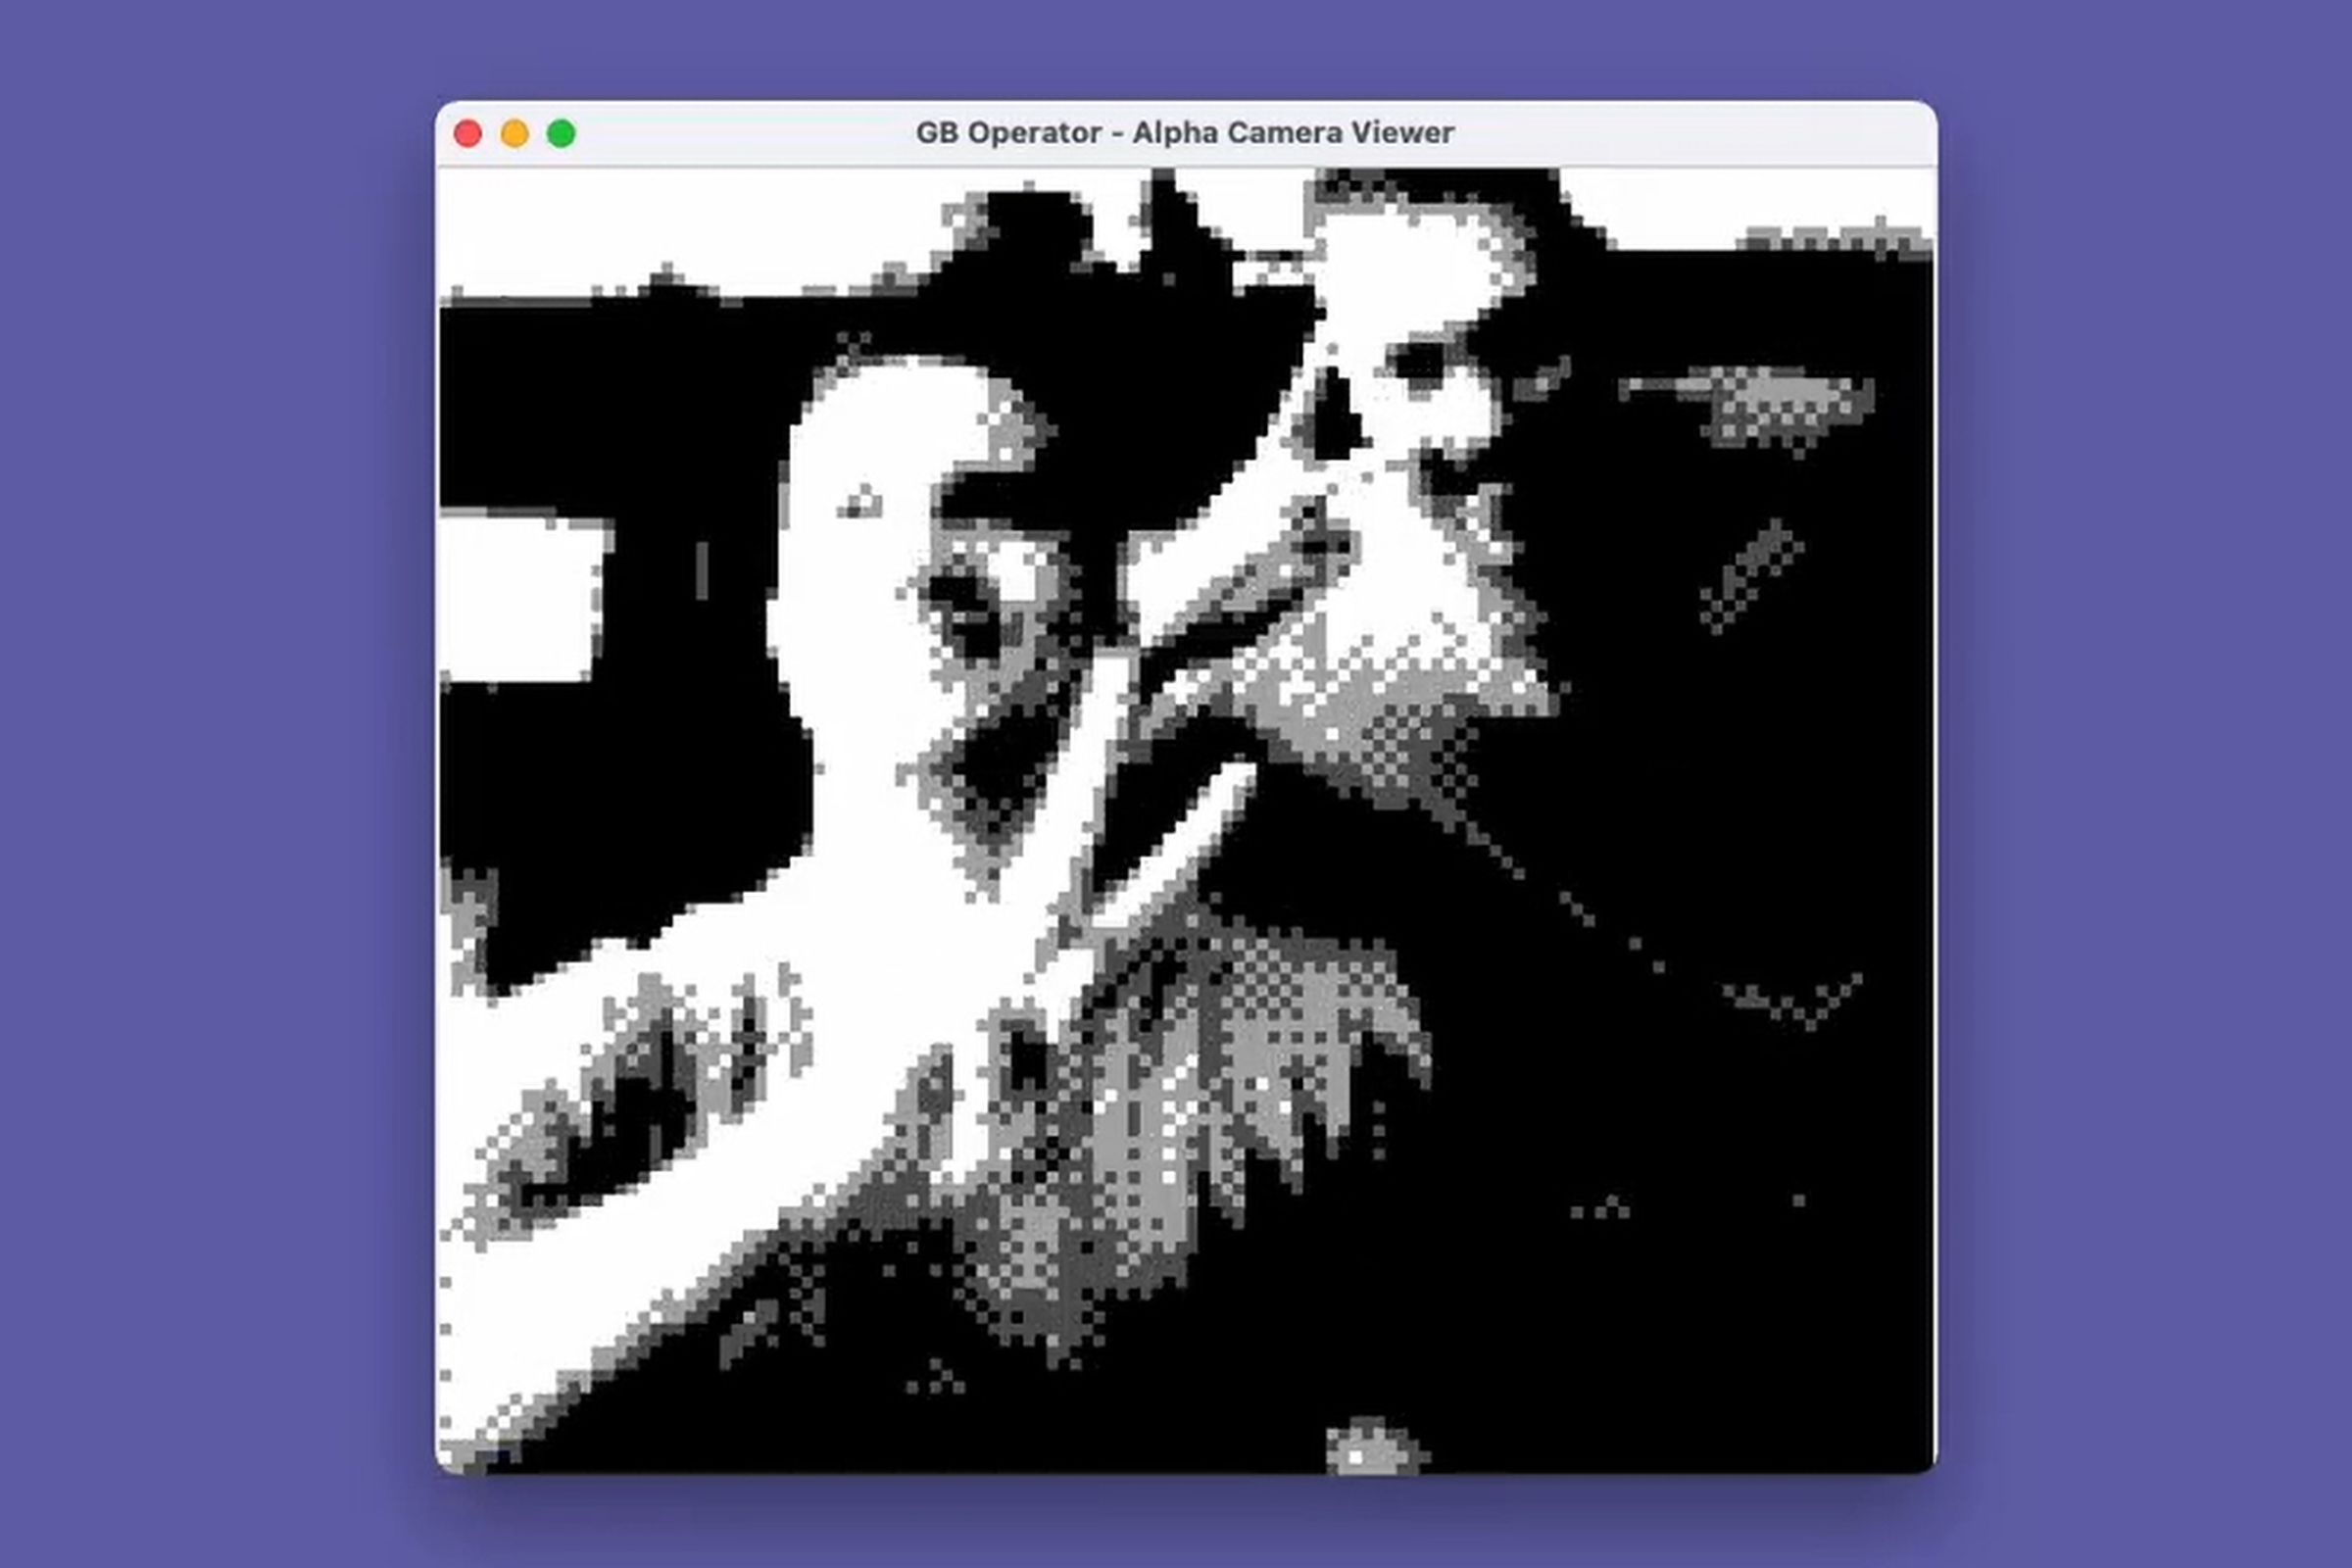 A low-resolution image of two people being livestreamed through the Game Boy Camera.